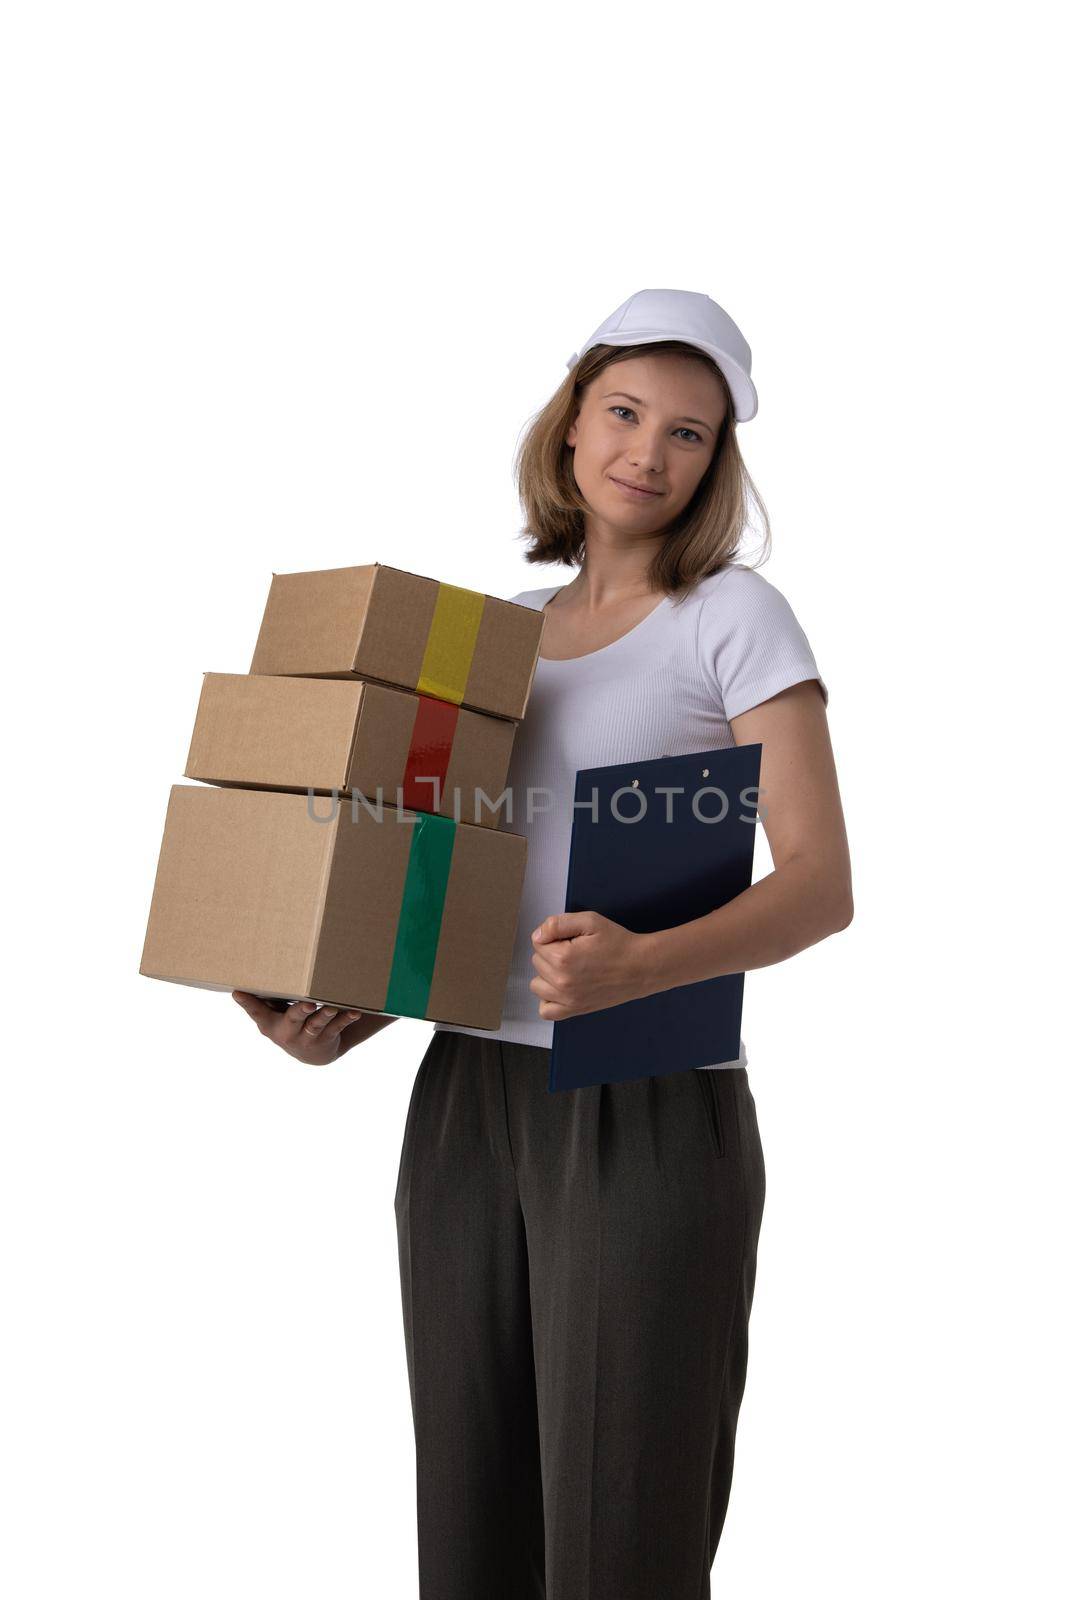 Young girl with cardboard boxes and document folder in hand isolated on white background